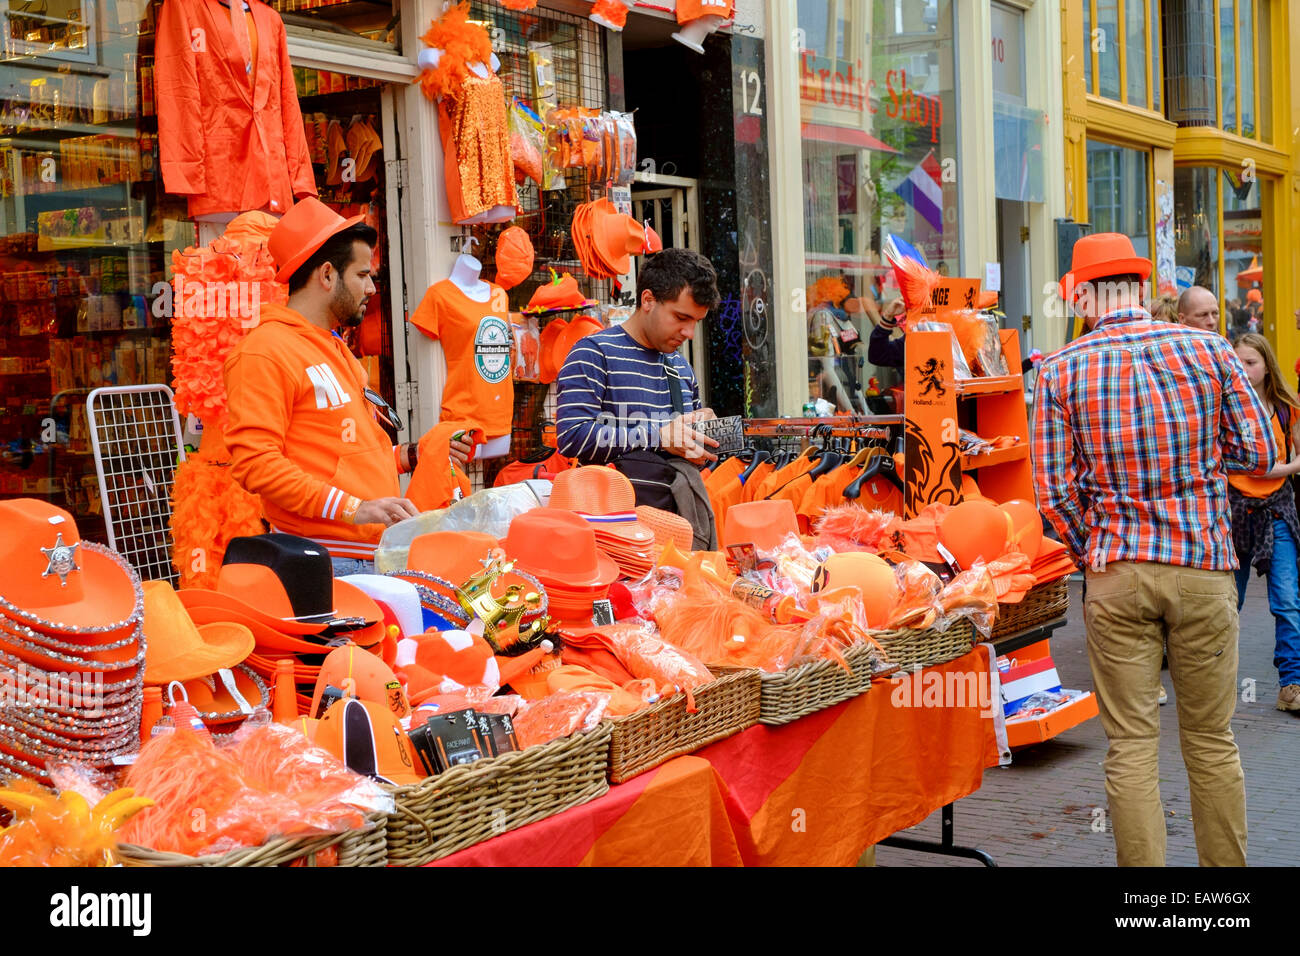 Vendors sell souvenirs and clothing in orange, the Dutch national color, for King's Day. Former Queen?s Day, held since 1890, became King?s Day, or Koningsdag this year. The change came last year after Queen Beatrix abdicated her post to her son Willem-Al Stock Photo